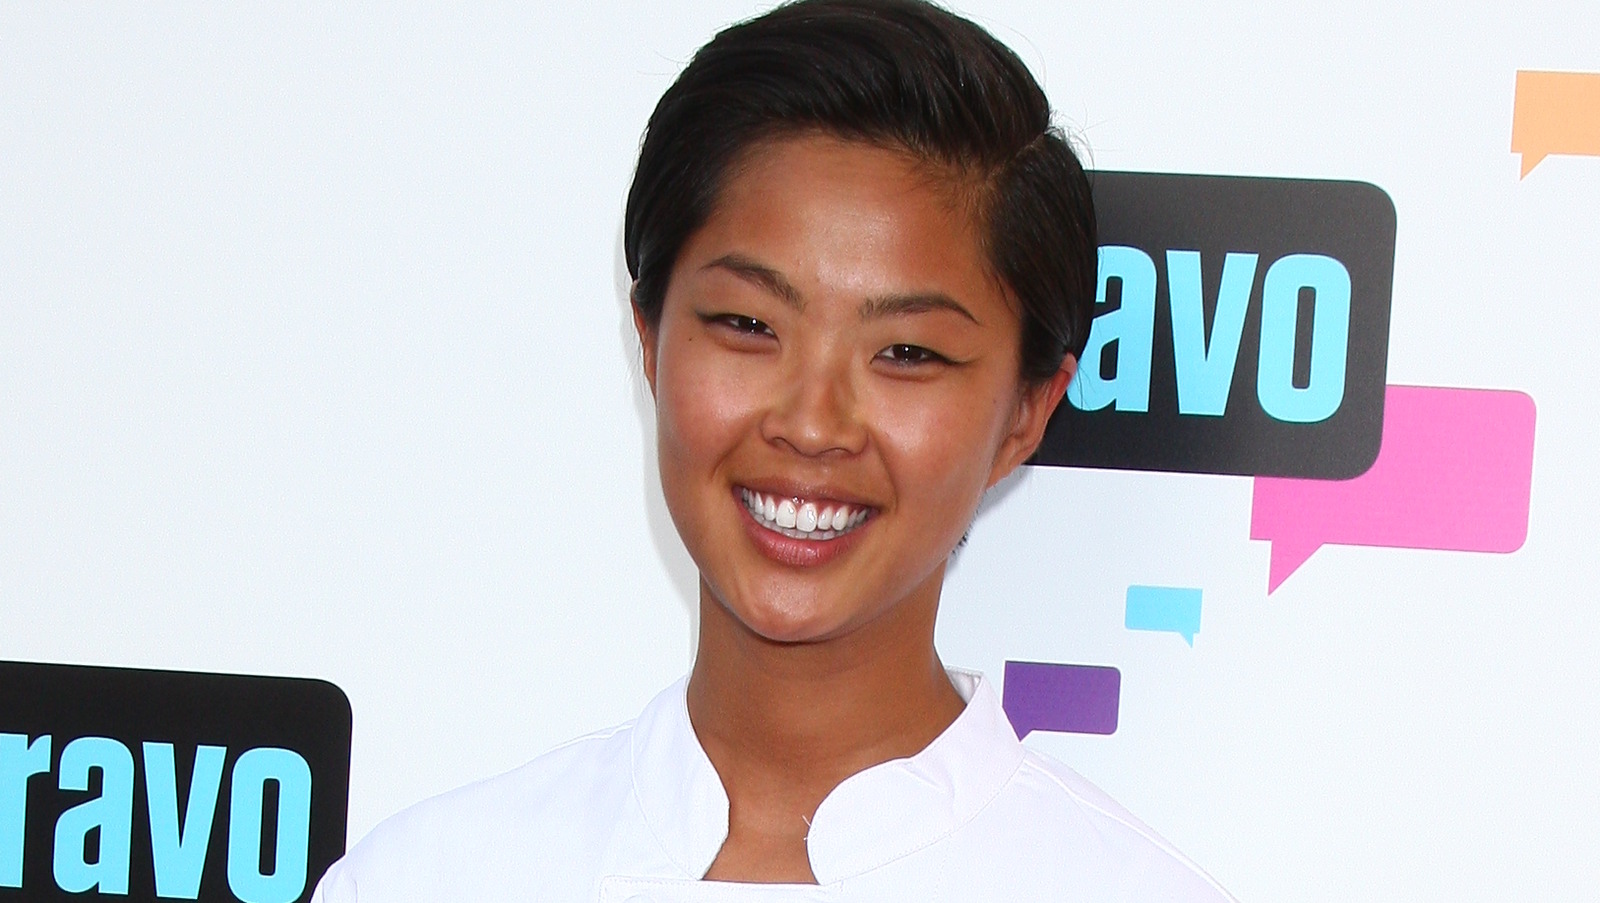 Kristen Kish Announced As The New Host Of Top Chef – Tasting Table